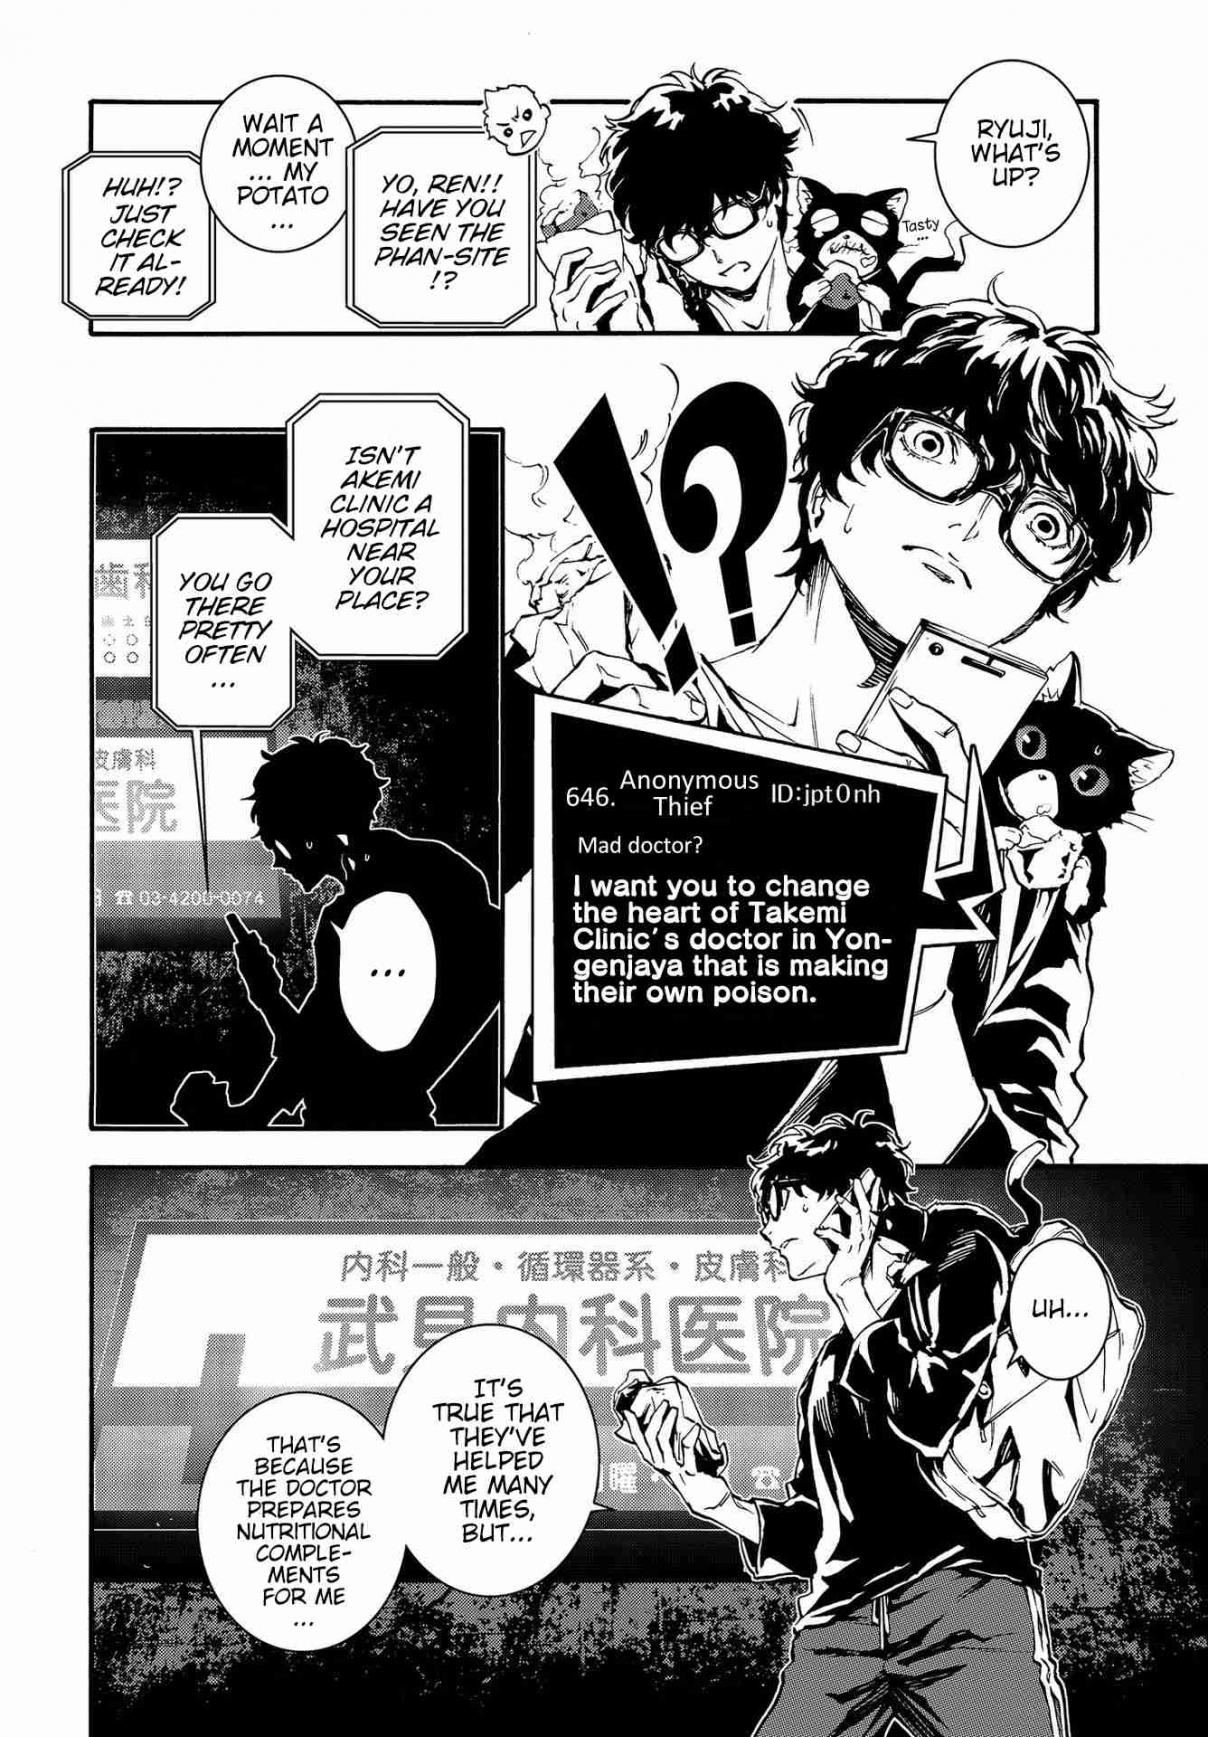 Persona 5 Mementos Mission Vol. 1 Ch. 3 Black and White Theory